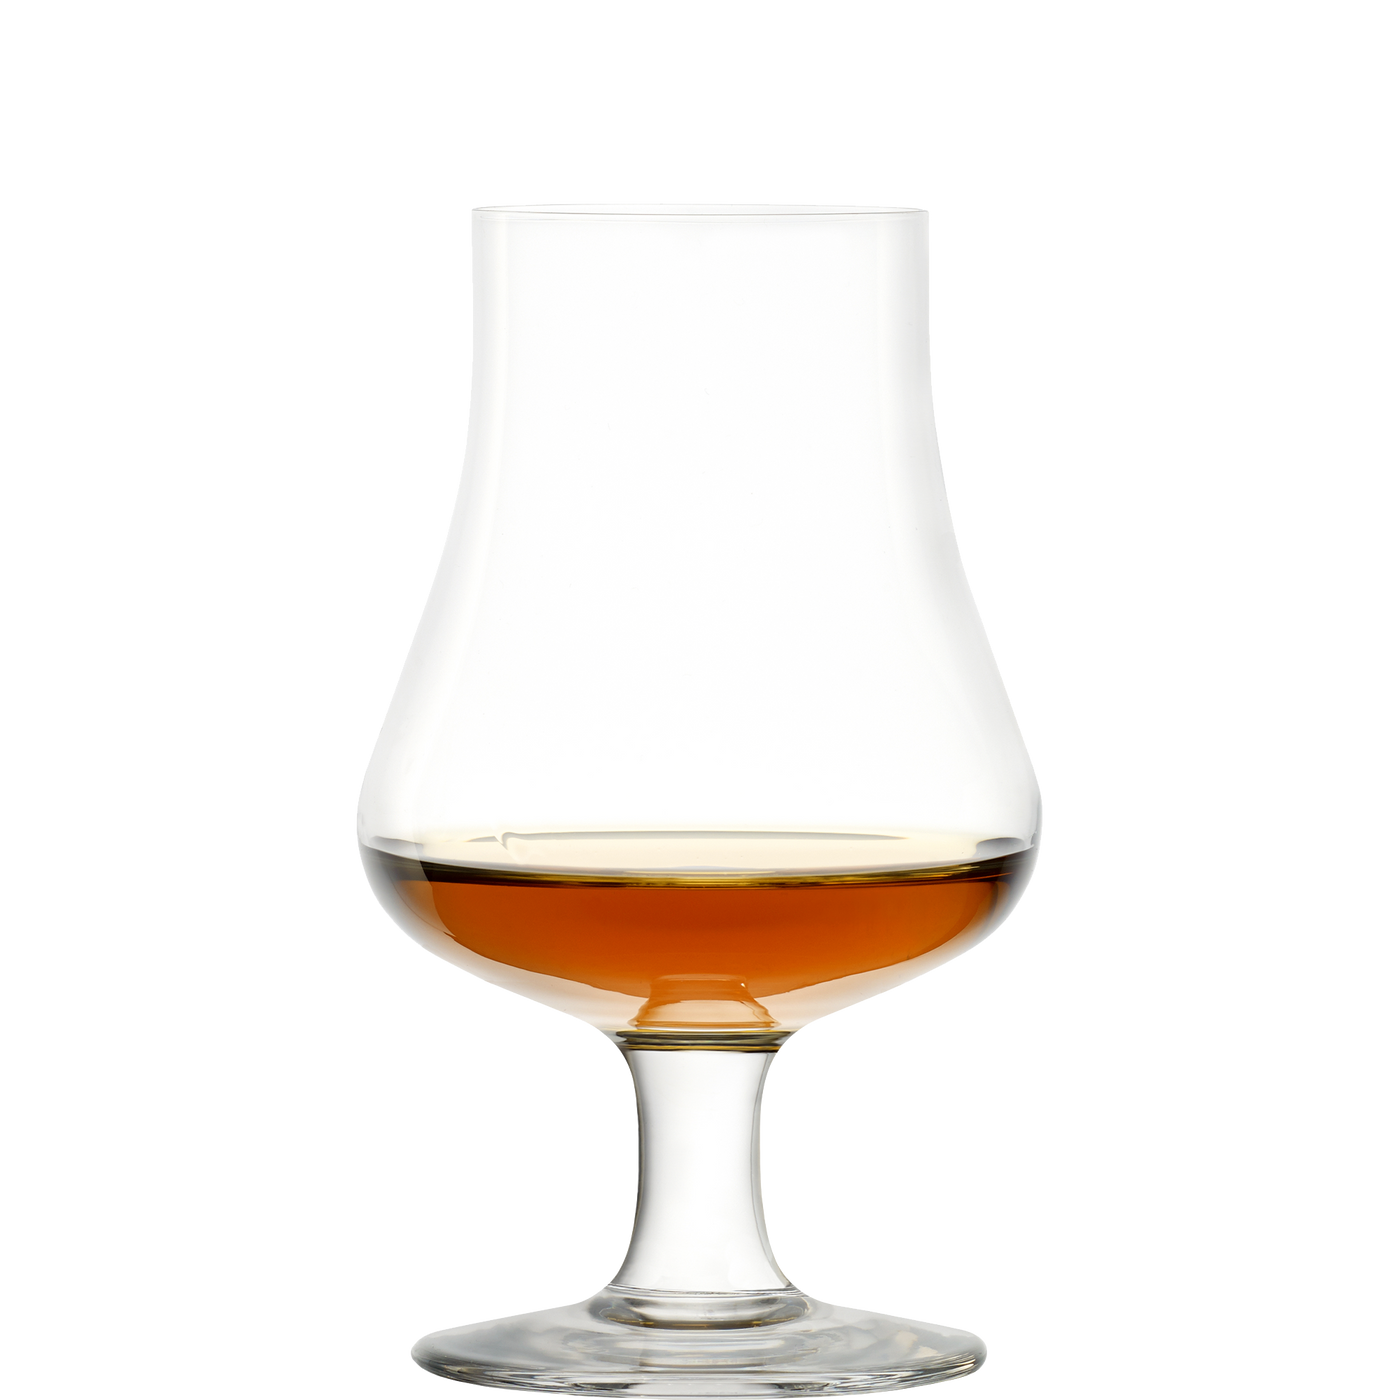 Whiskey/Nosing Glass 6.5 oz. - Four Display Packs of 6